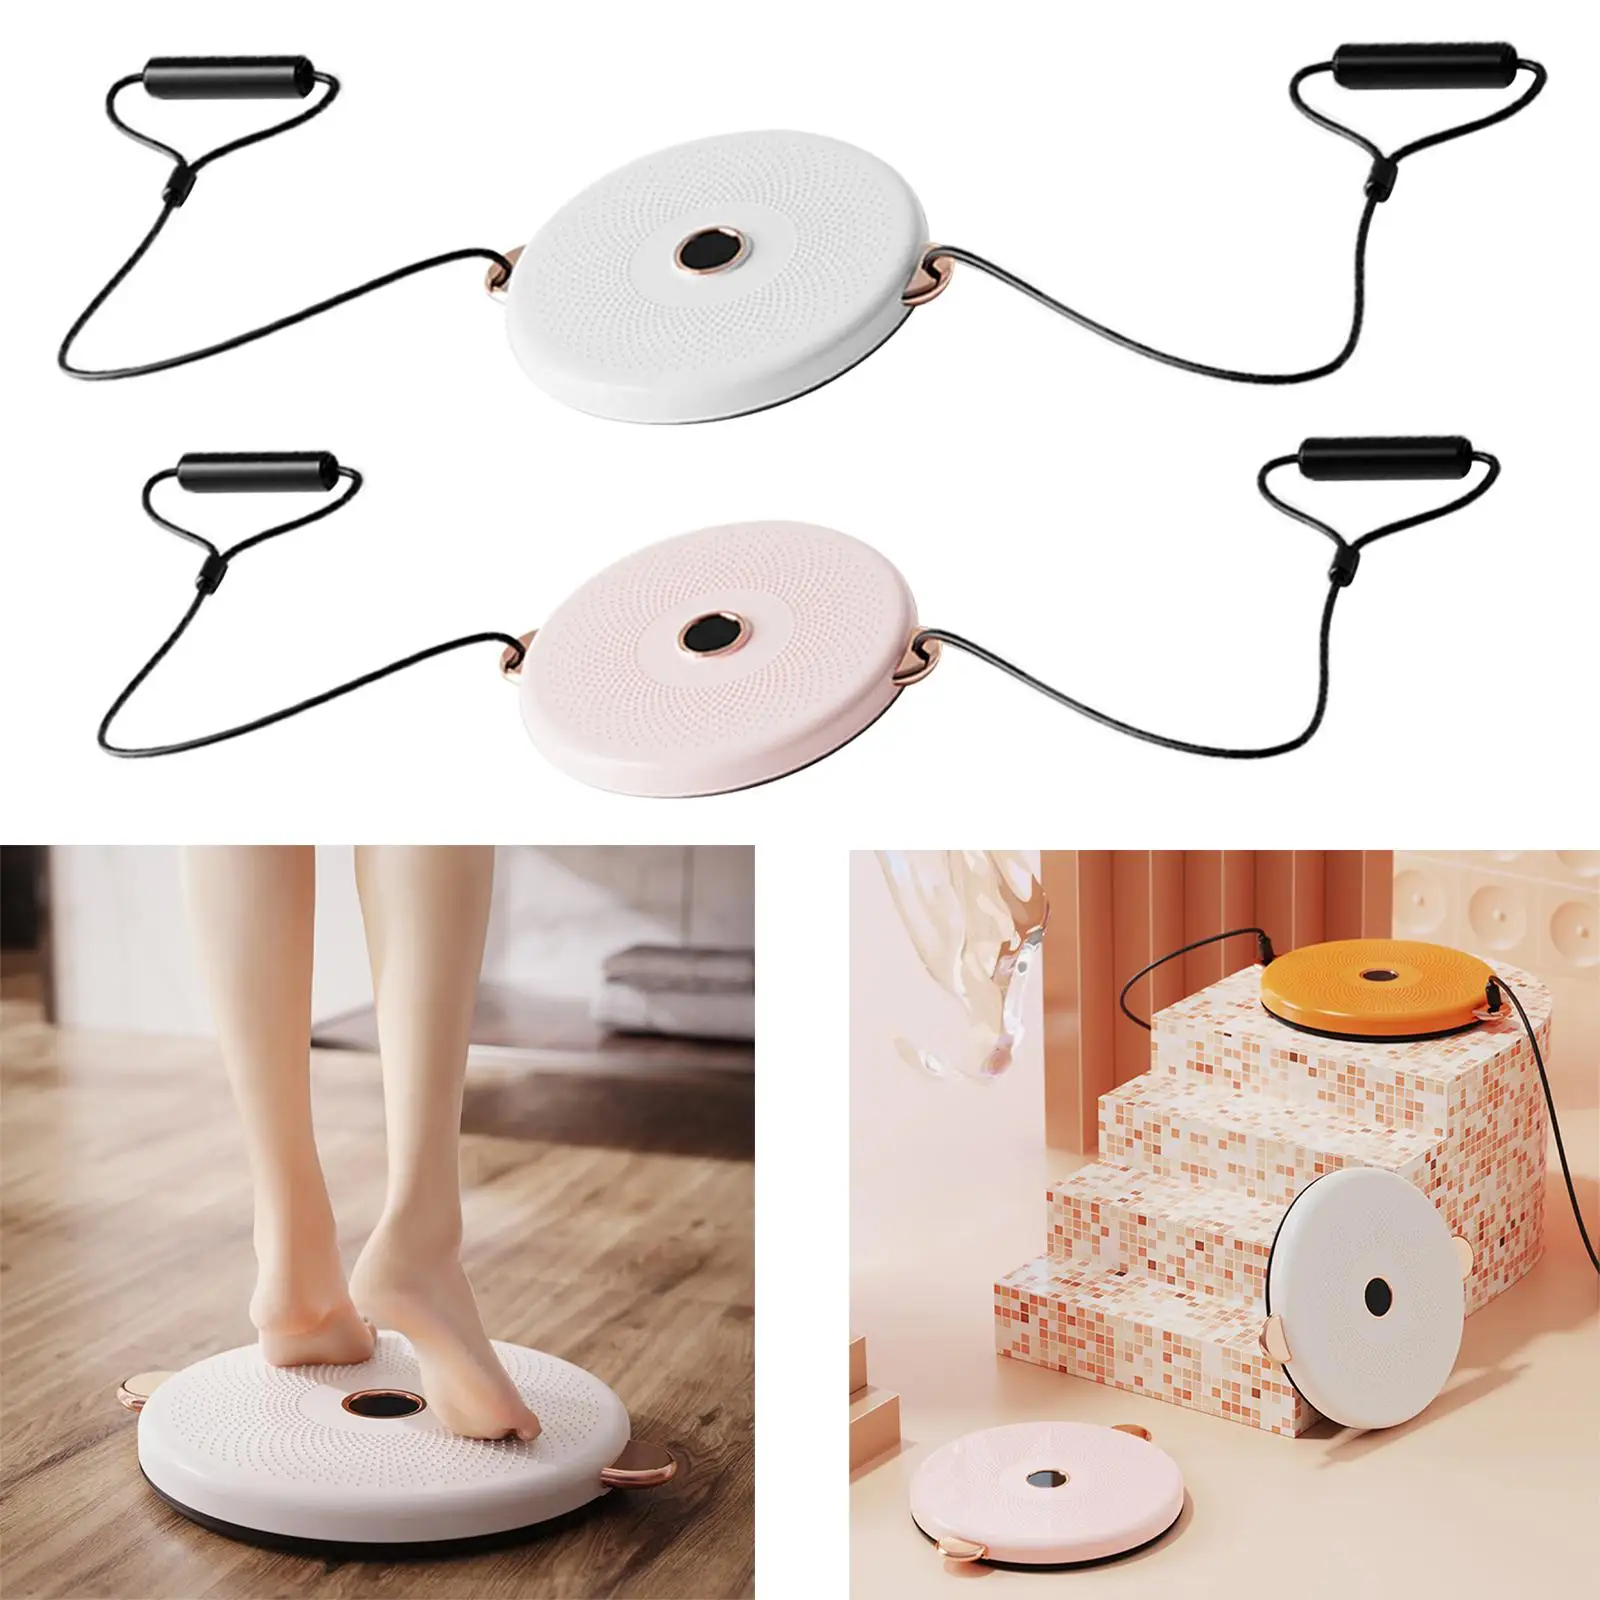 Multifunctional Waist Twisting Disc, Stable Exercise Fitness Equipment, Portable